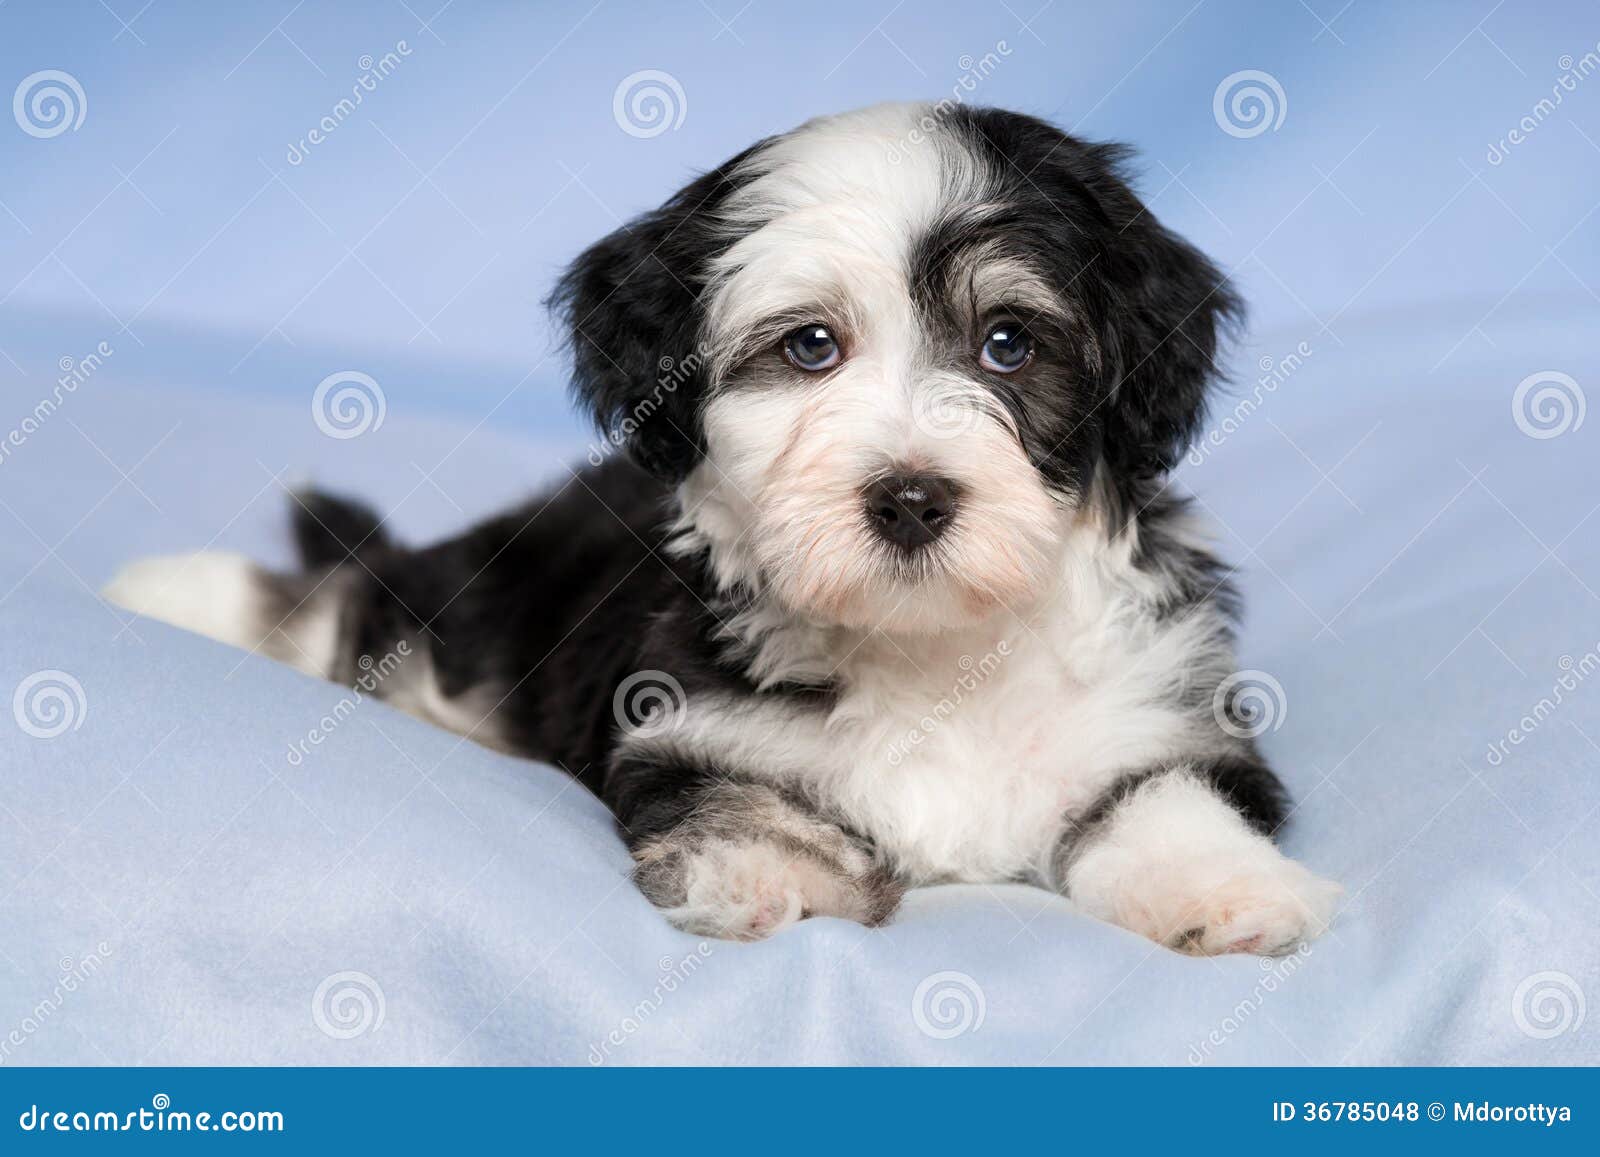 Cute Havanese Puppy Dog Is Lying On A Blue Blanket Stock Photography ...